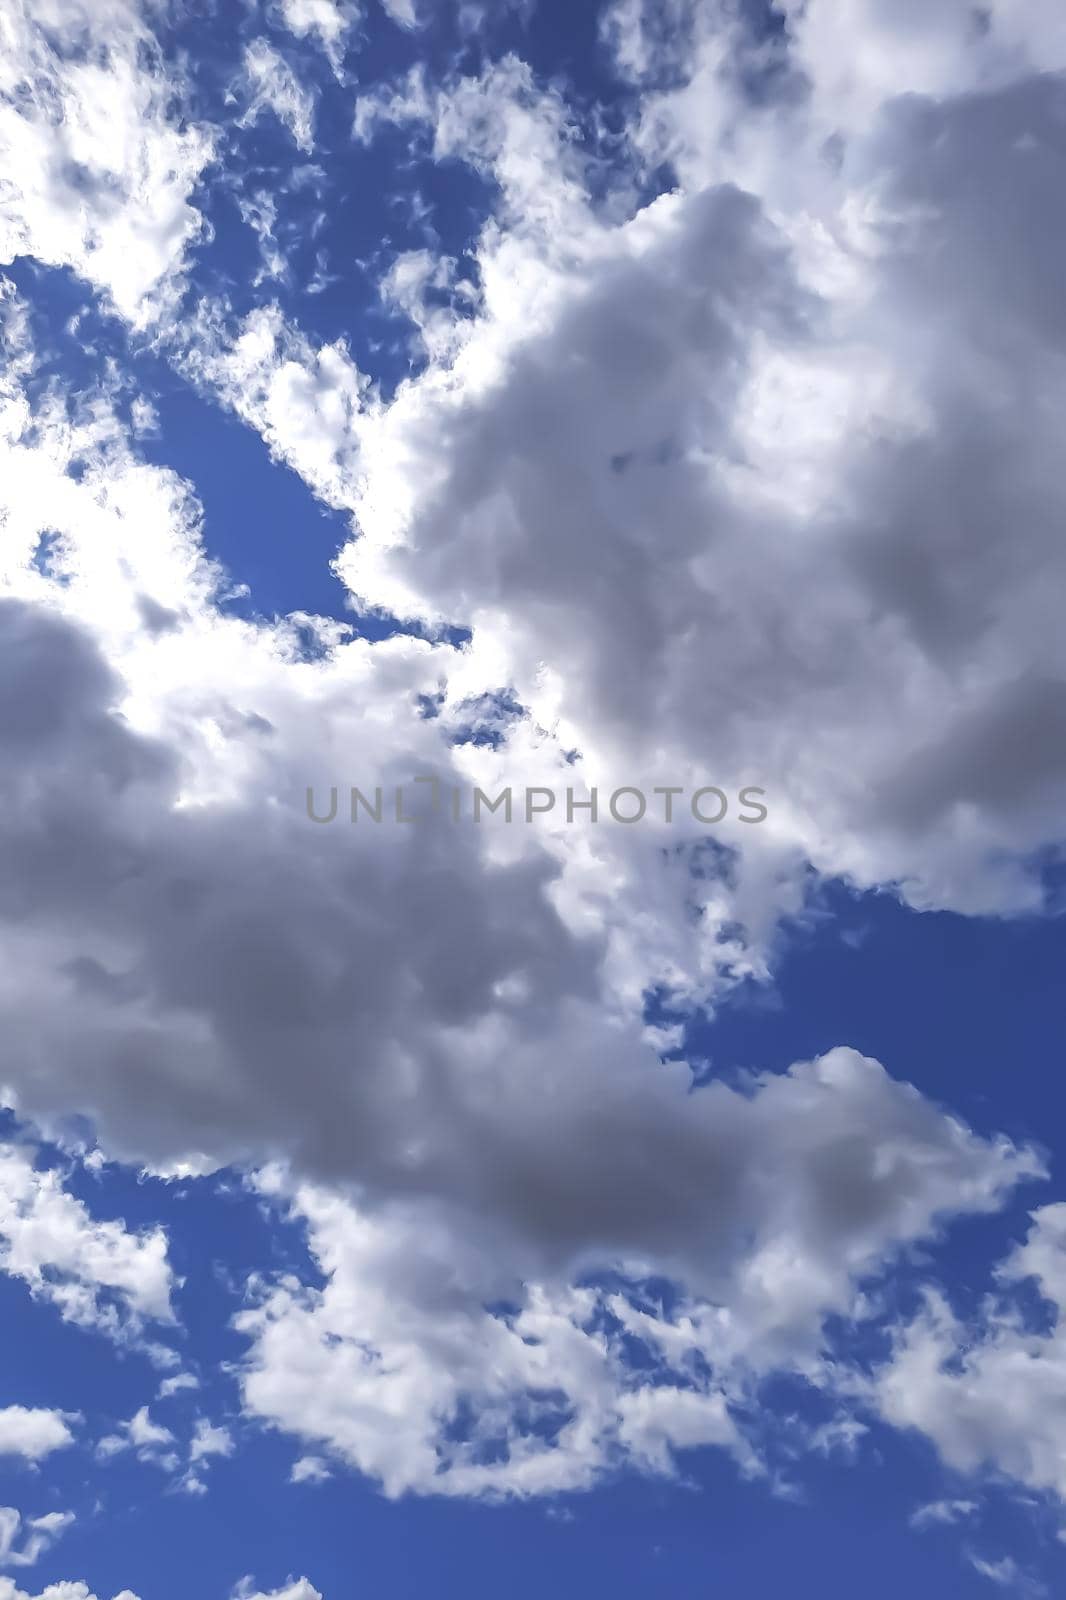 Bottom view of a blue sky with white clouds. by kip02kas